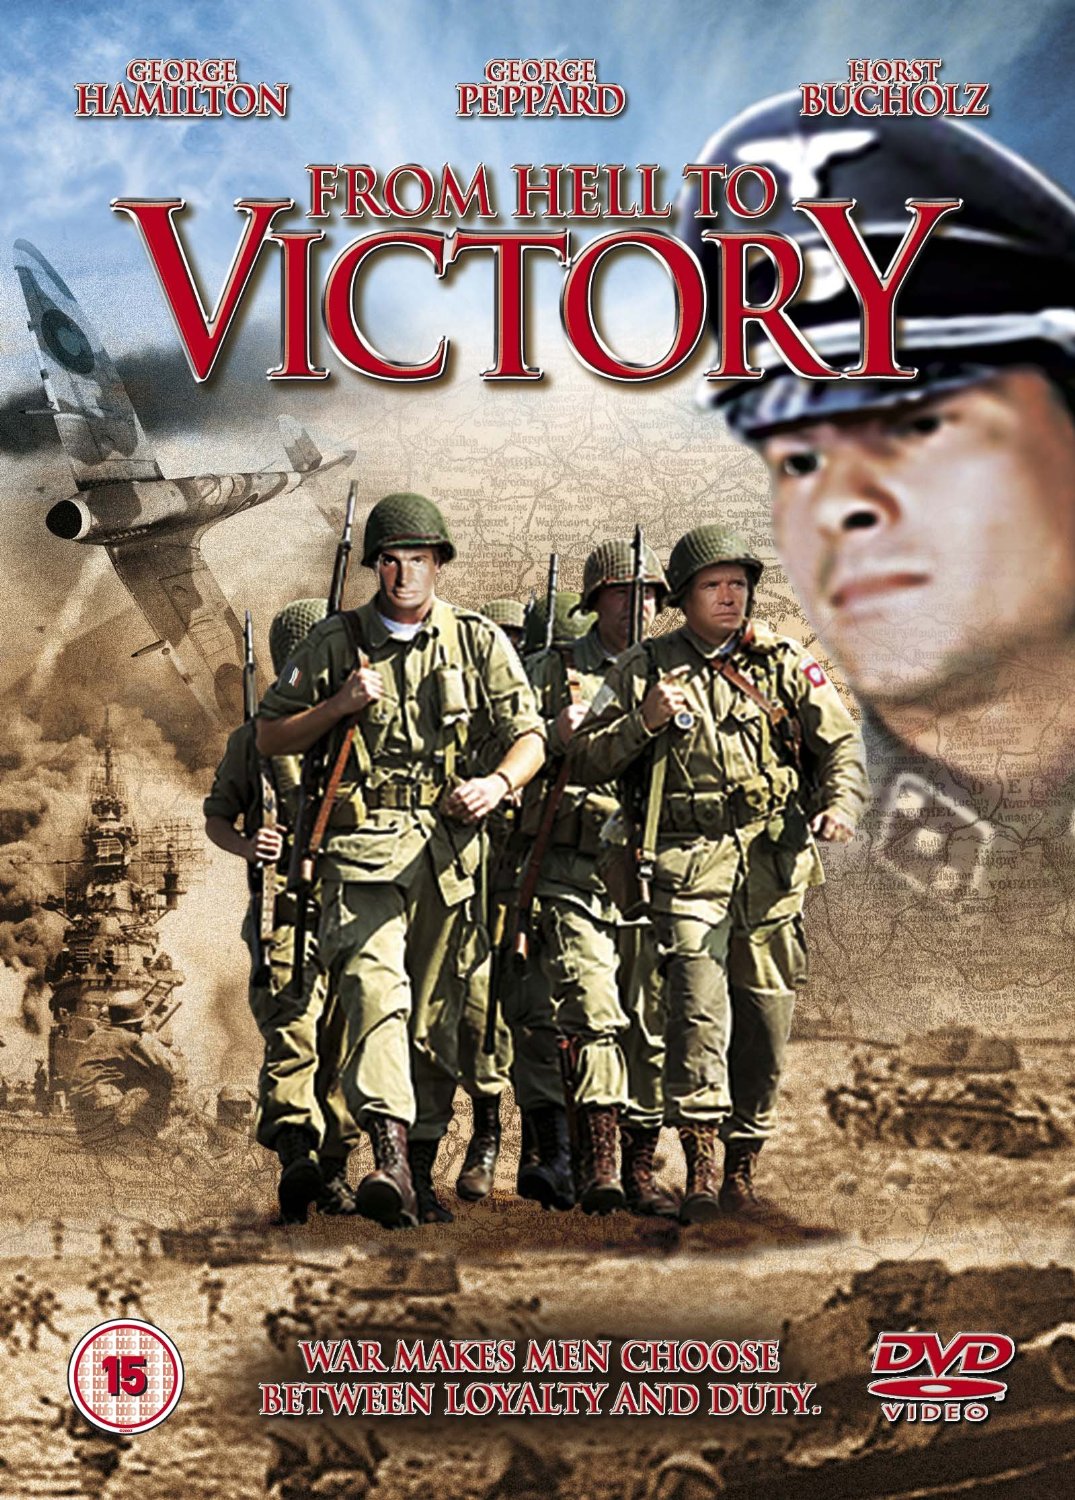 From Hell To Victory (DVD)